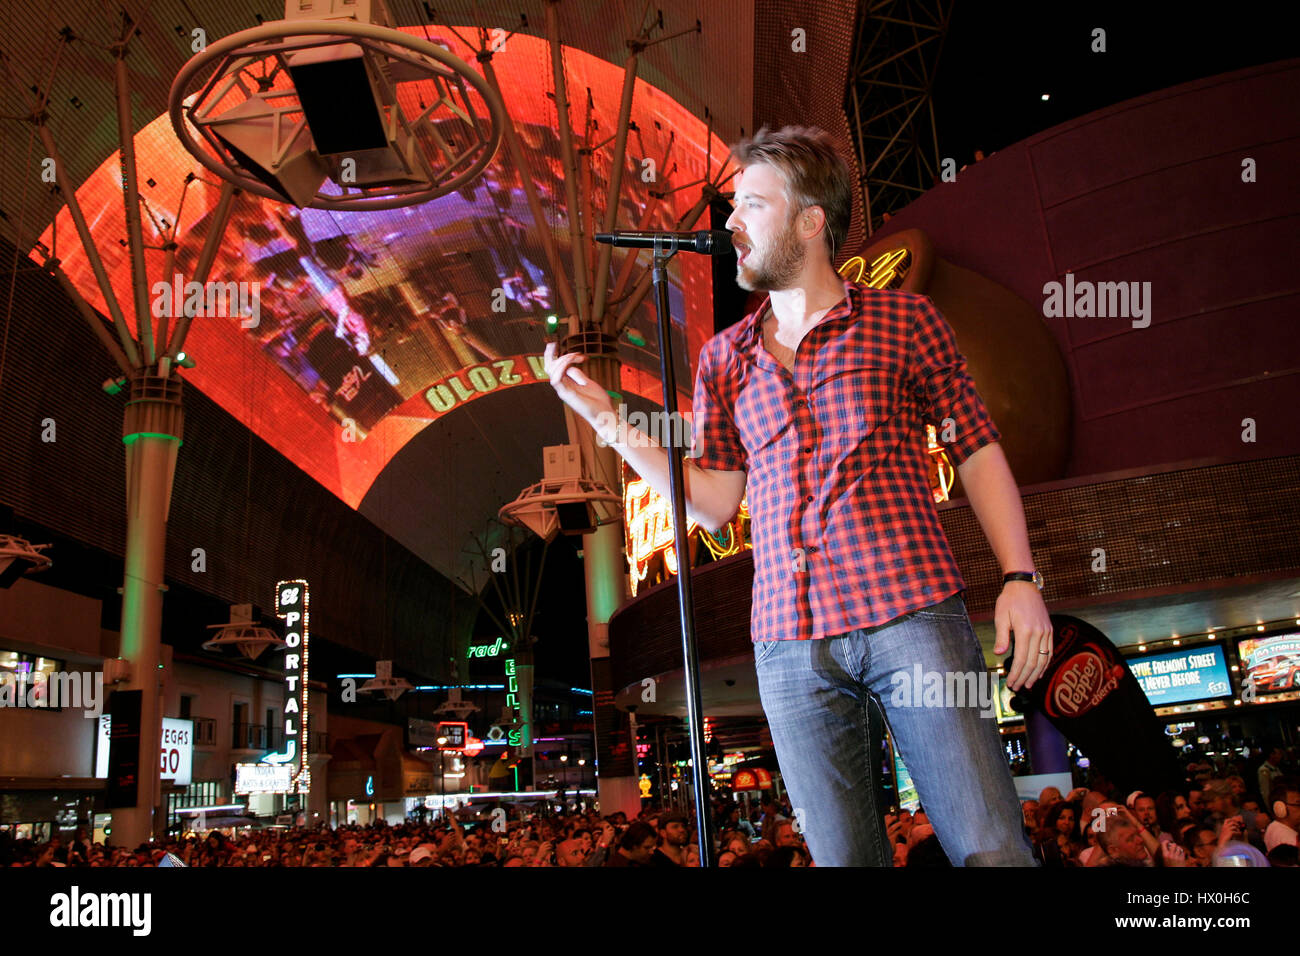 Lady Antebellum with Charles Kelley perform on Fremont Street in Las Vegas, Nevada on April 16, 2010. Photo by Francis Specker Stock Photo